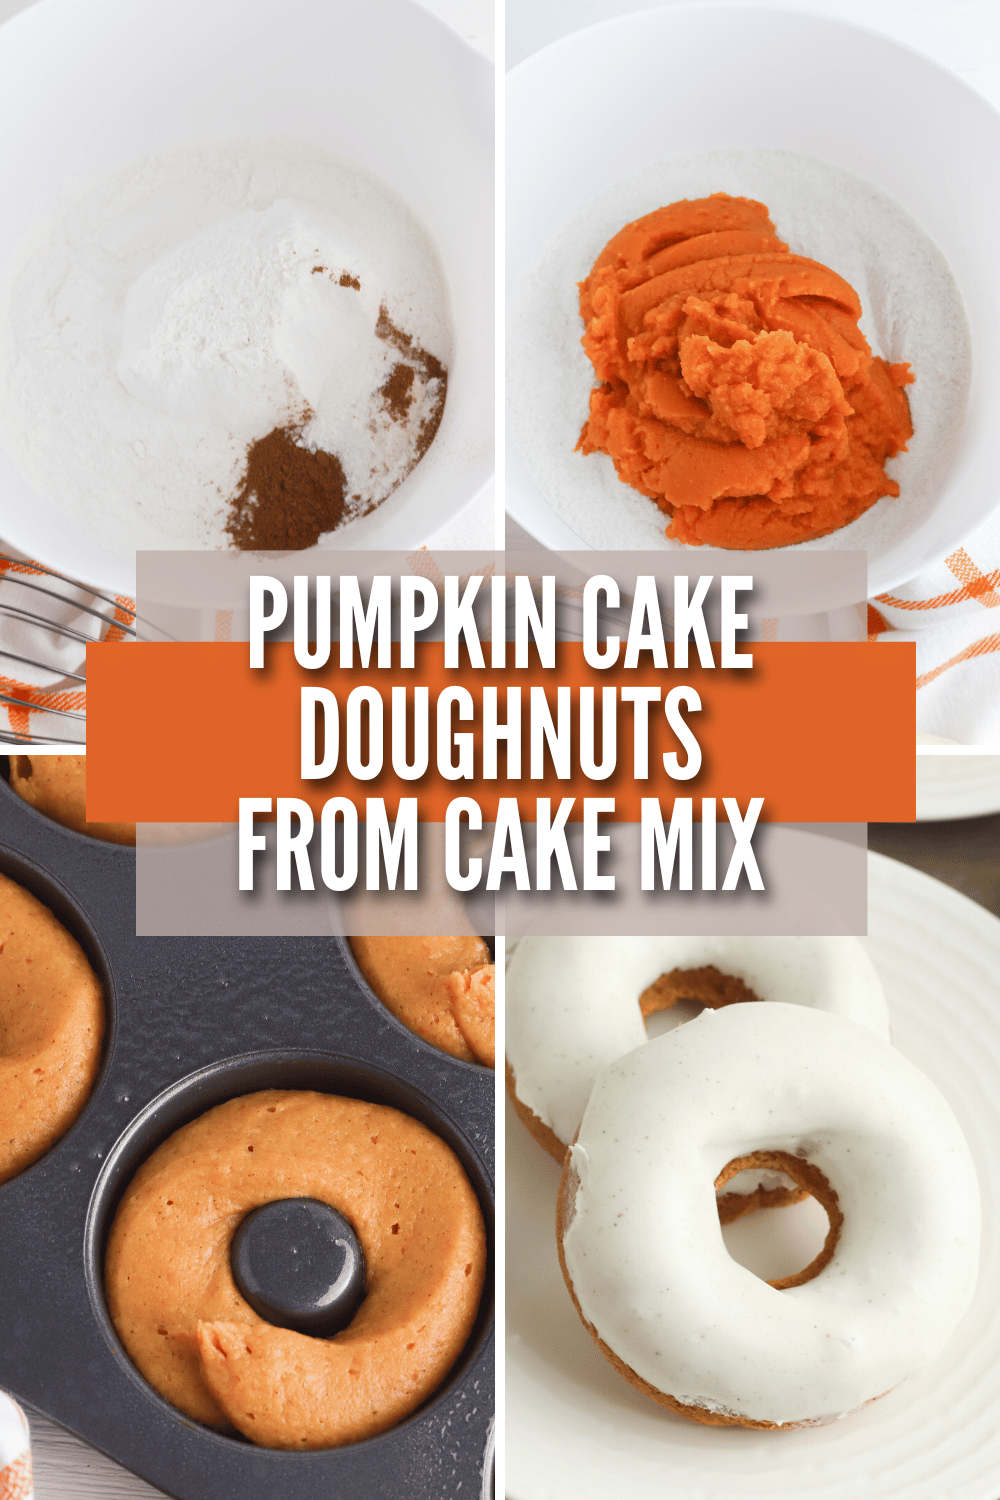 These Pumpkin Cake Doughnuts are an easy and delicious fall breakfast or snack! Made with a cake mix, they are super simple to make. #pumpkincakedoughnuts #pumpkin #doughnuts #donuts #Fall via @wondermomwannab